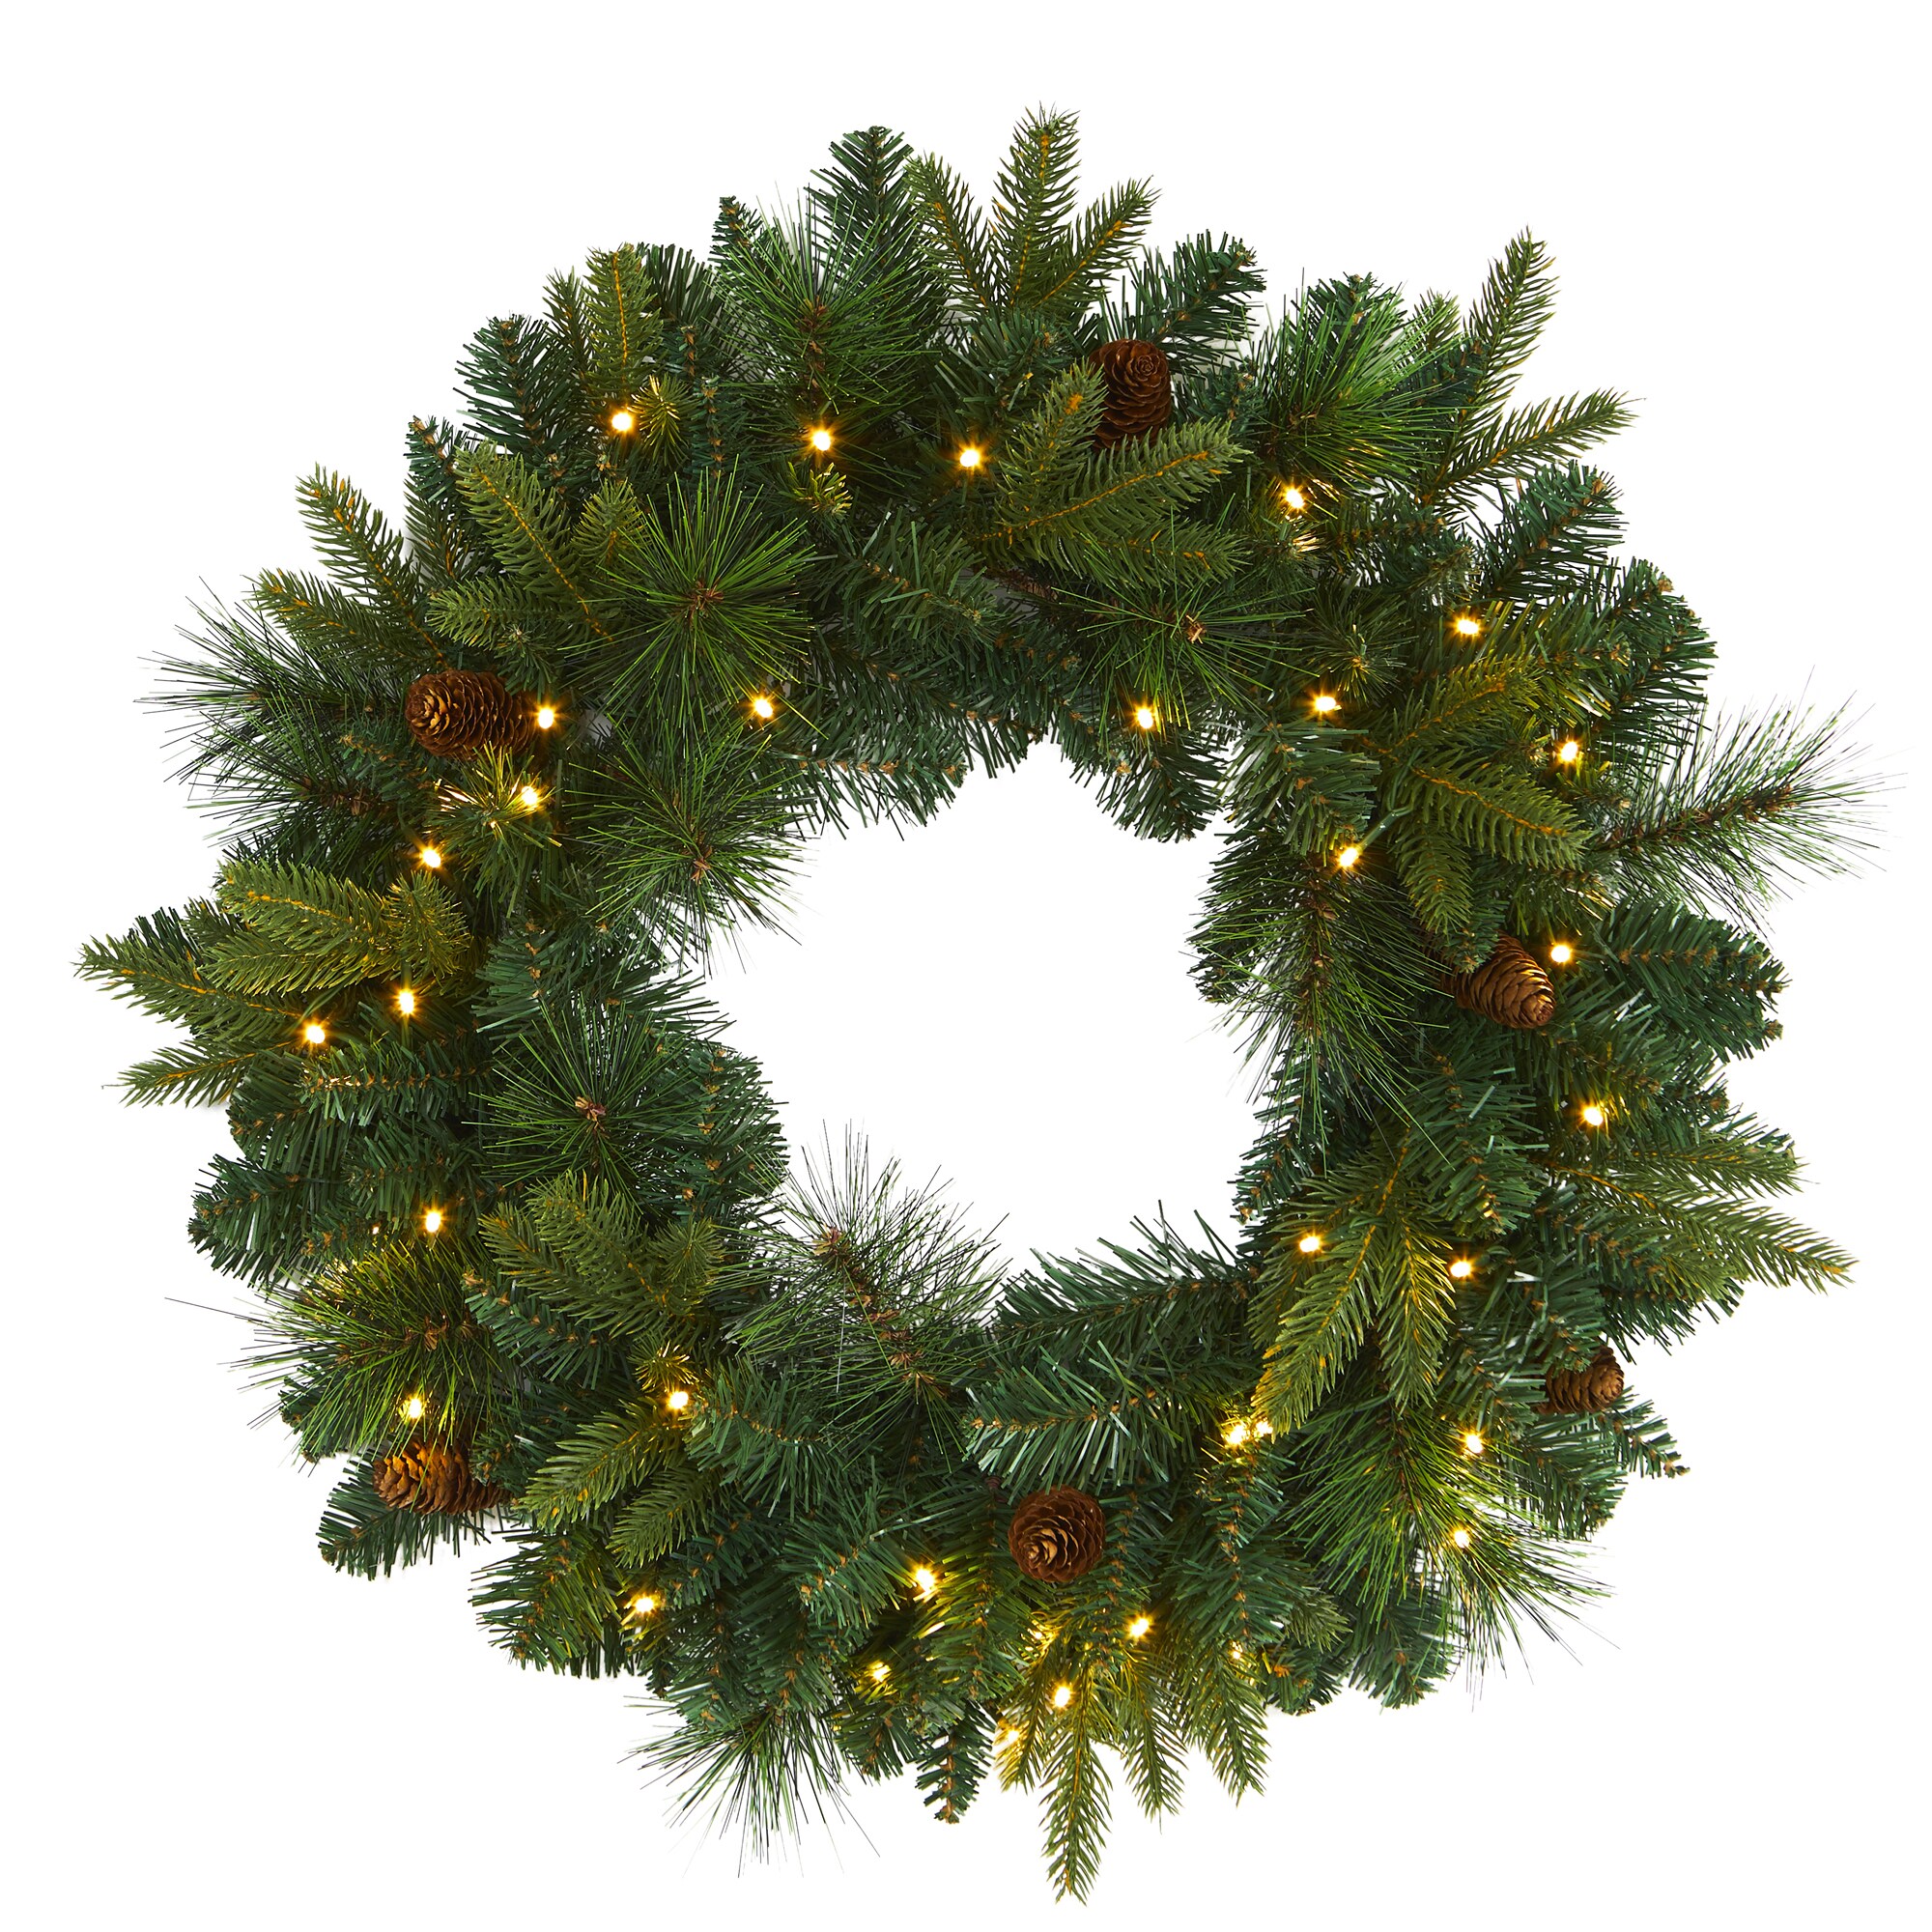 Christmas Decoration for Indoor Front Door and Outdoor with Pinecones Red Berries Led Illuminated Garlands Battery Operated 36Inch Artificial Round Christmas Wreath